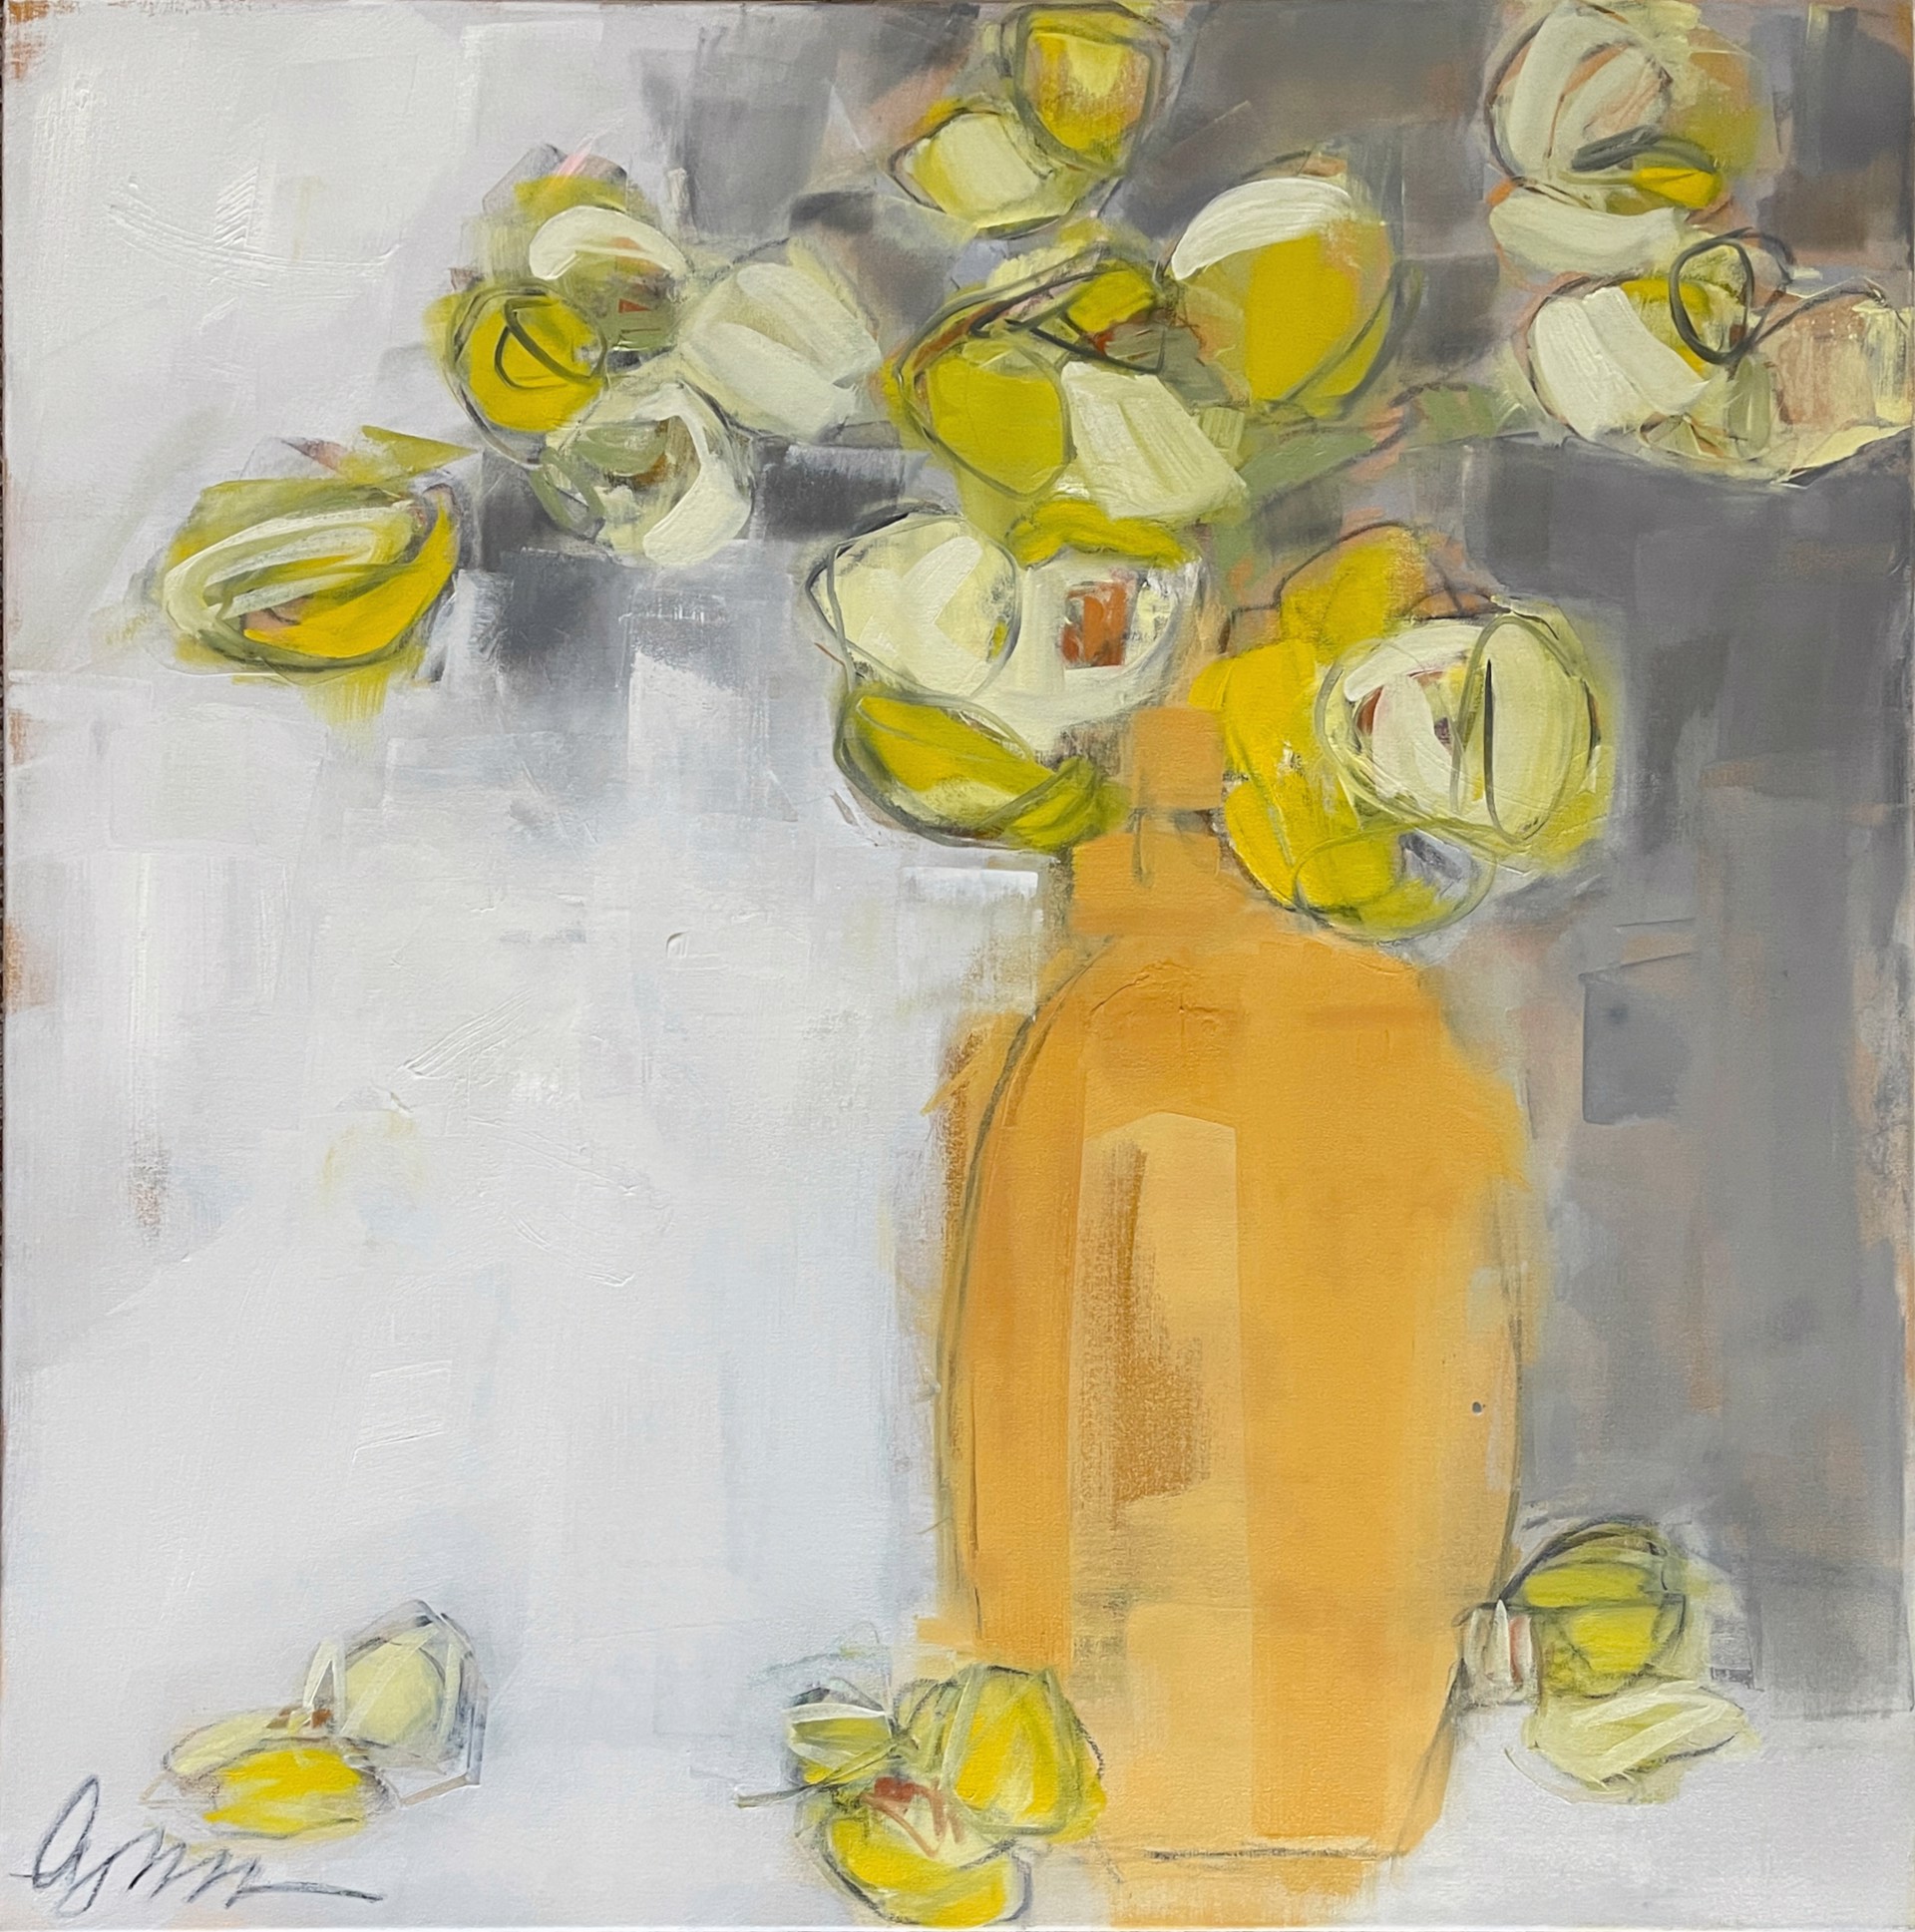 Citrus by Atlanta artist and painter Lynn Johnson is a 40"H x 40"W abstract floral painting made of oil and graphite.